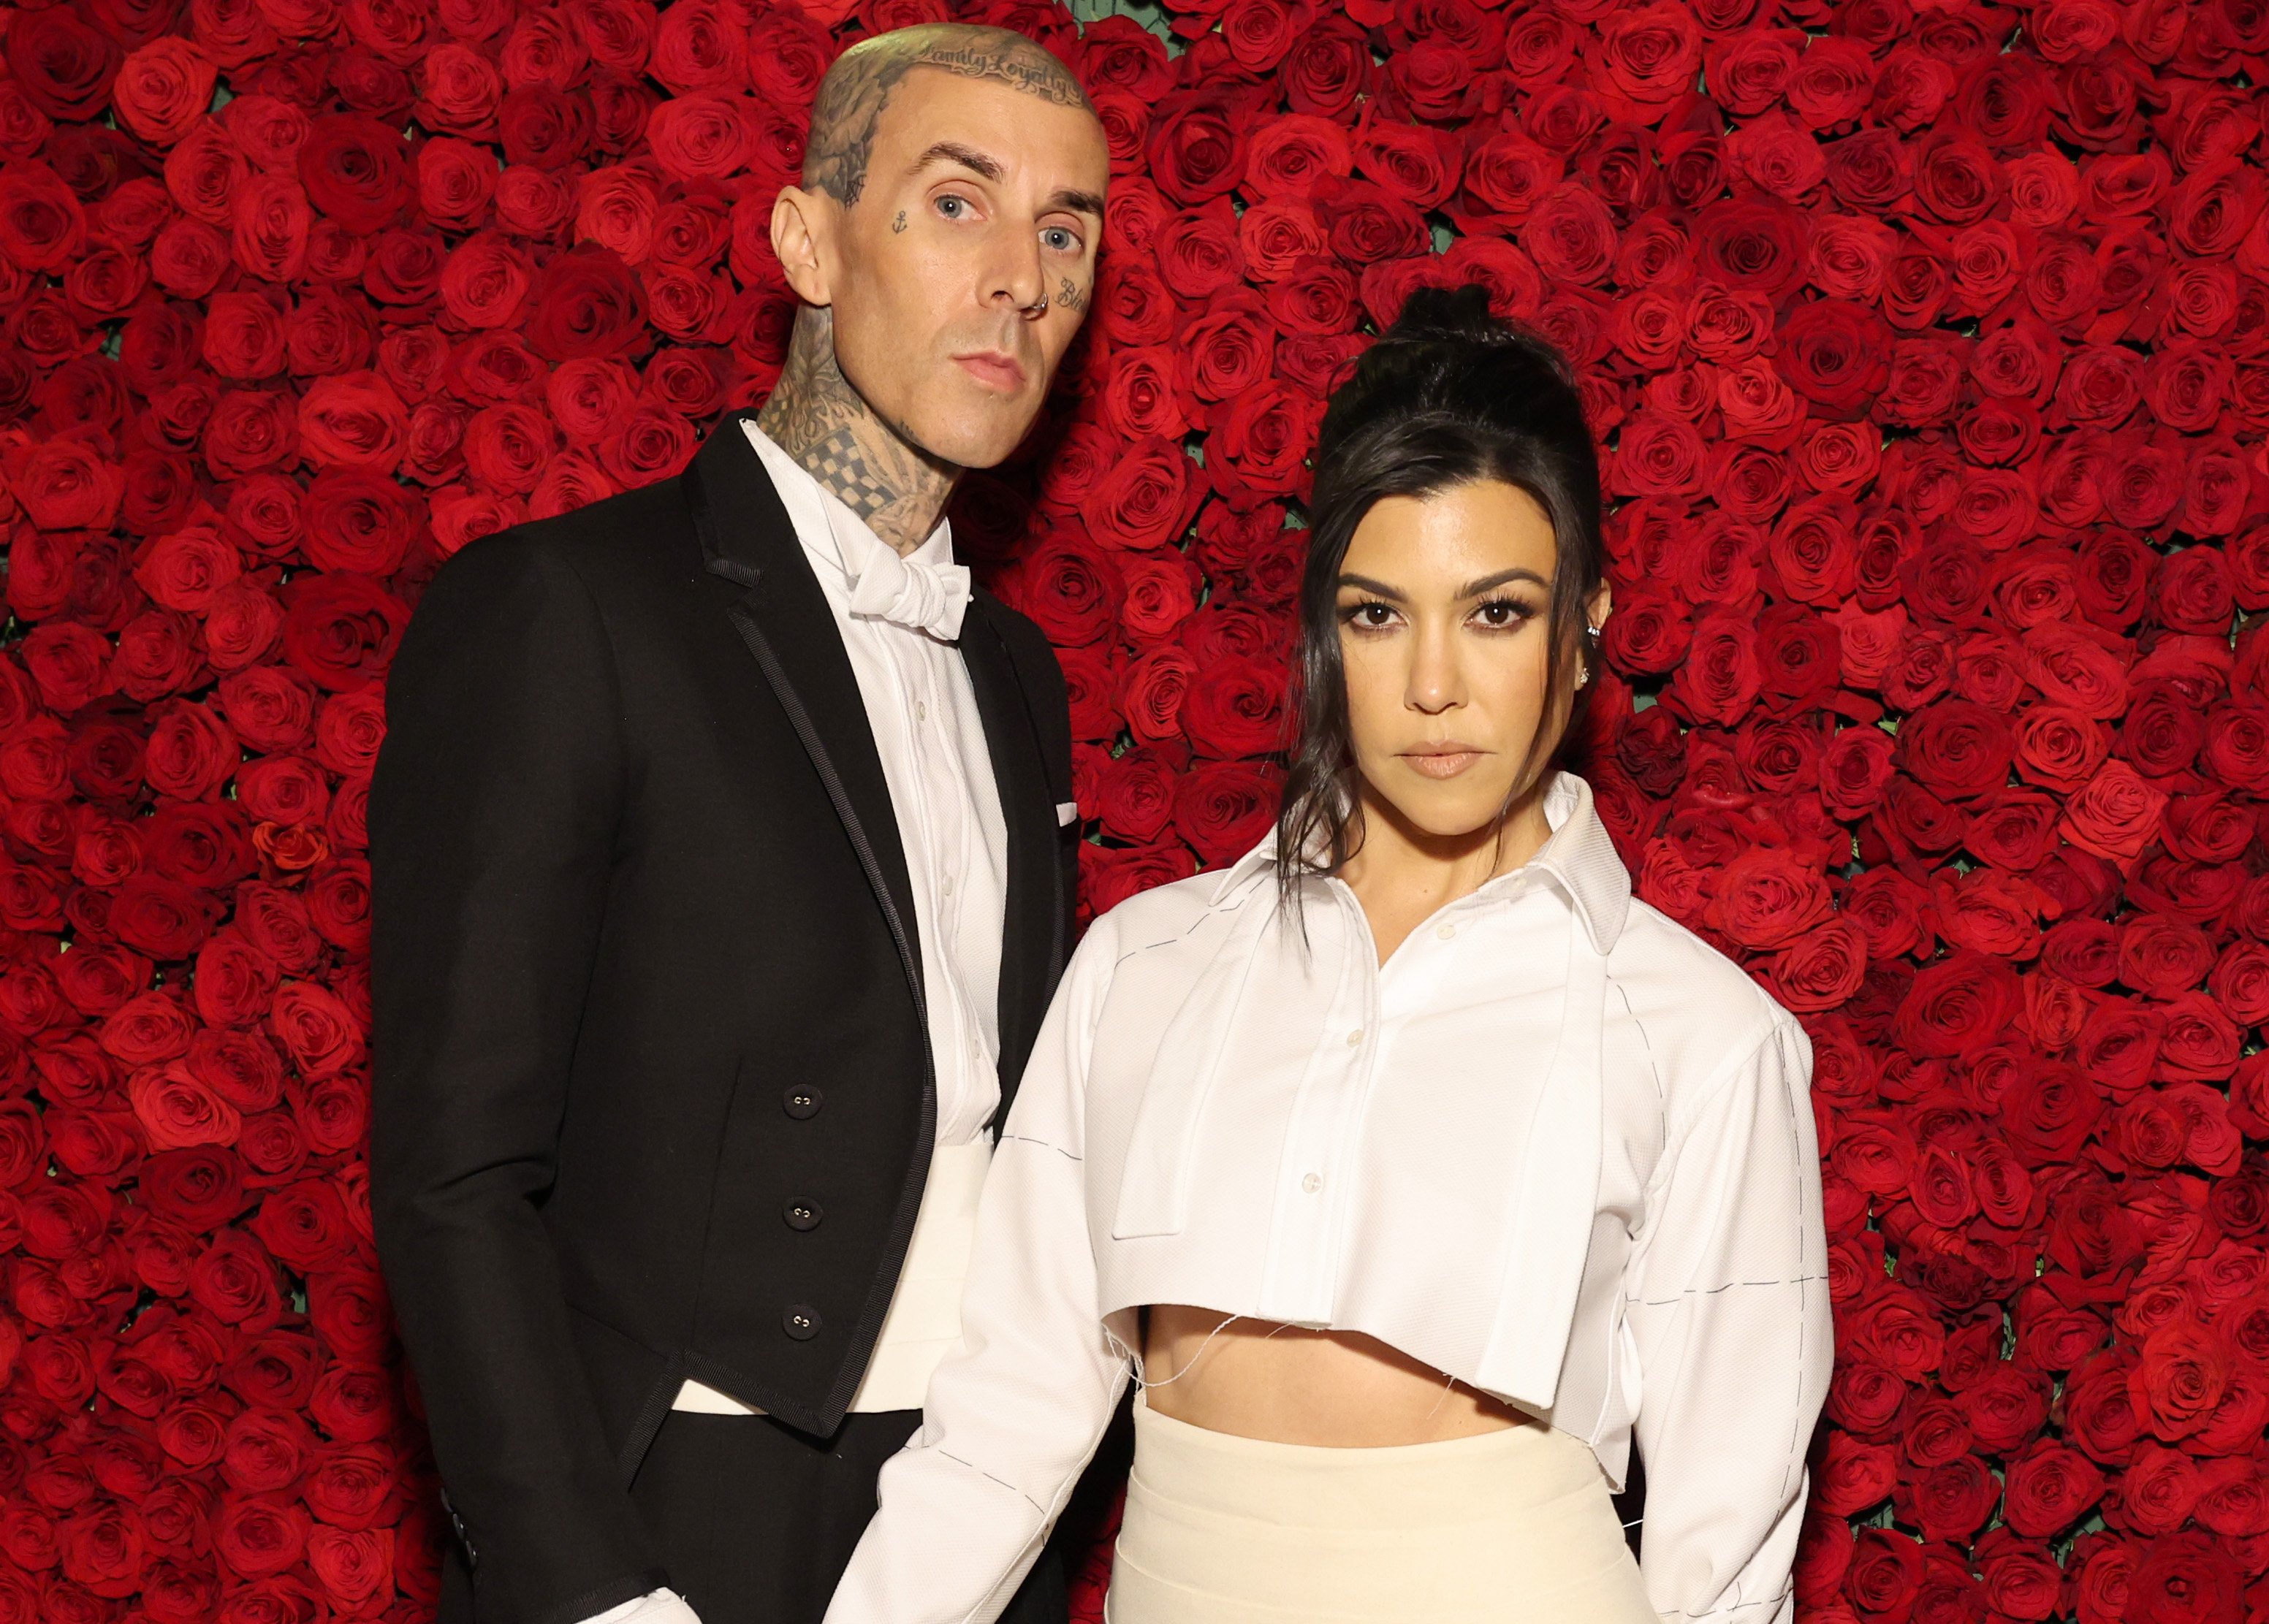 Travis Barker and Kourtney Kardashian pose for a photo in front of a wall of red flowers.